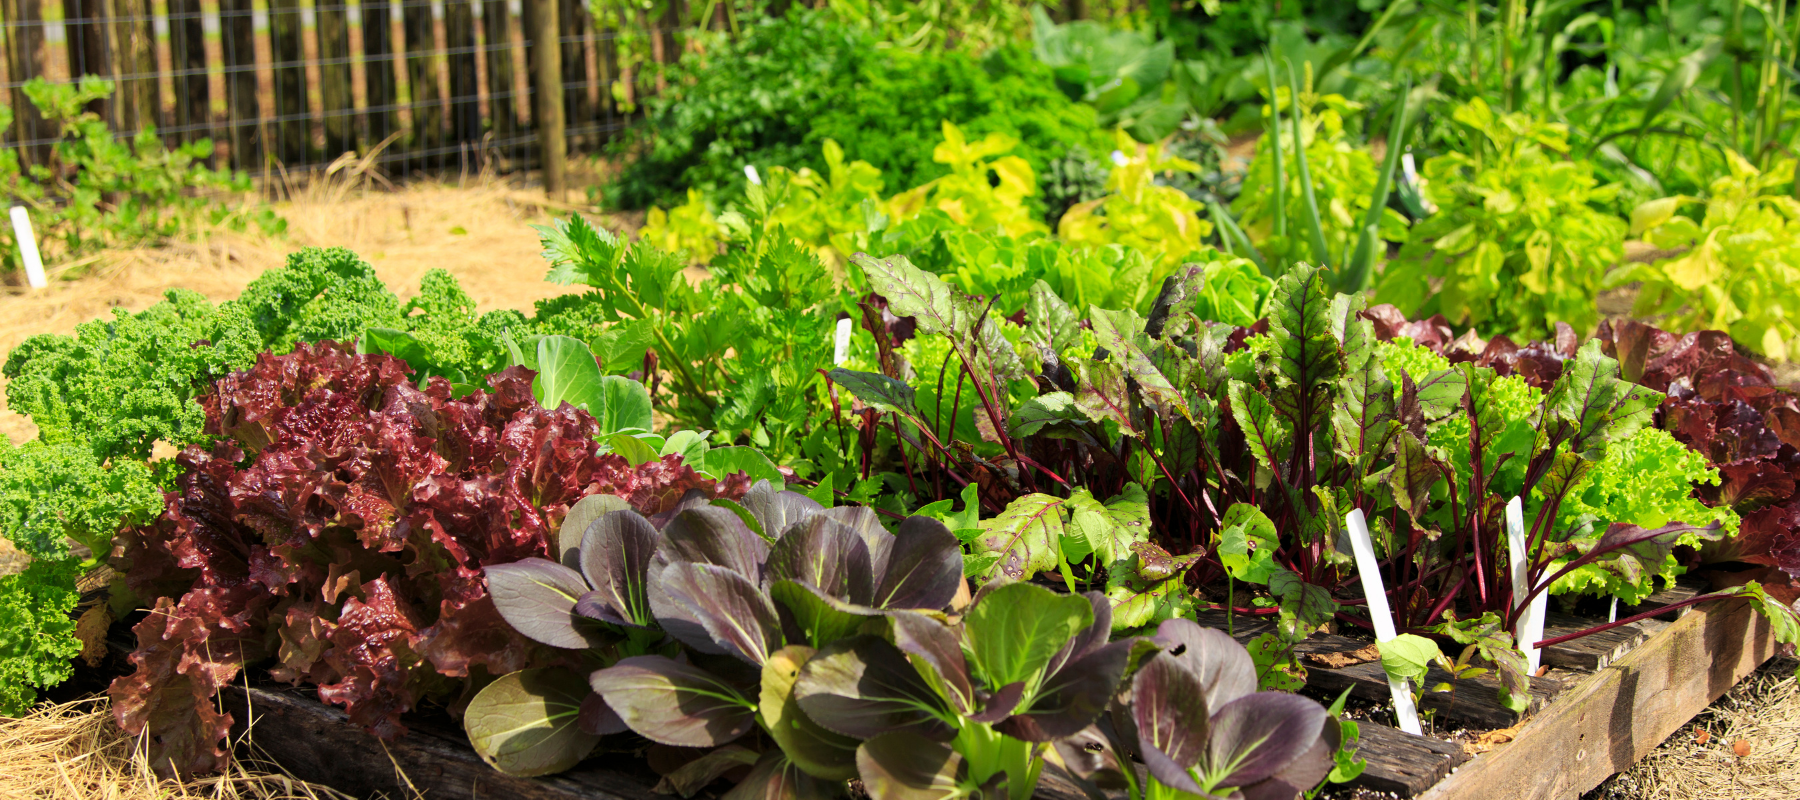 Growing your own food is the quickest way to solve climate change